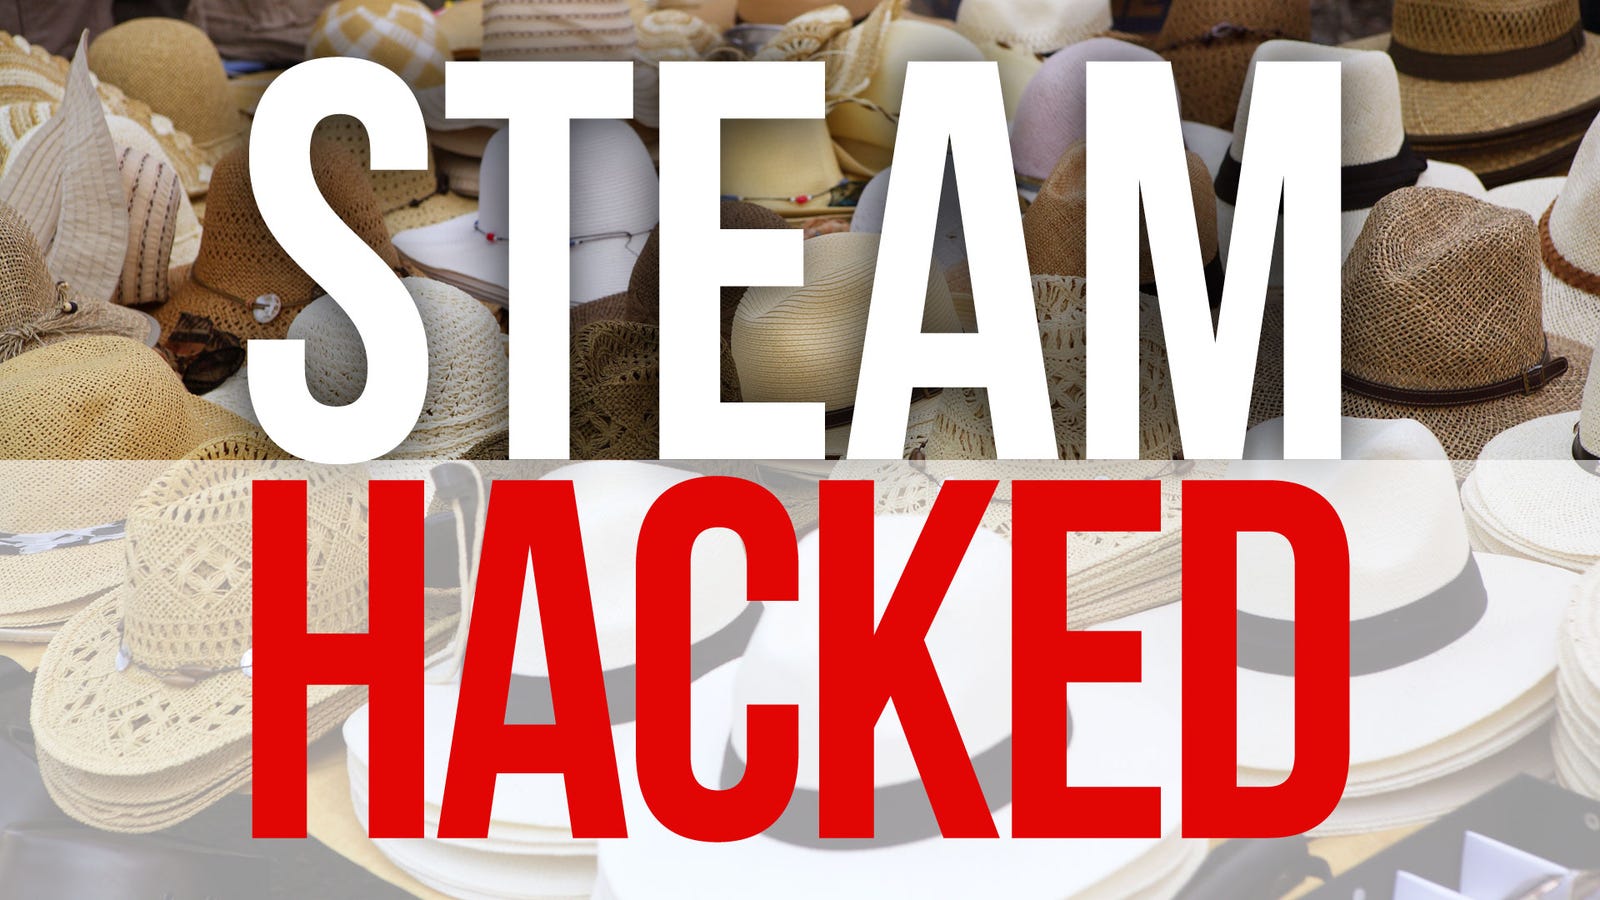 My steam is hacked фото 23